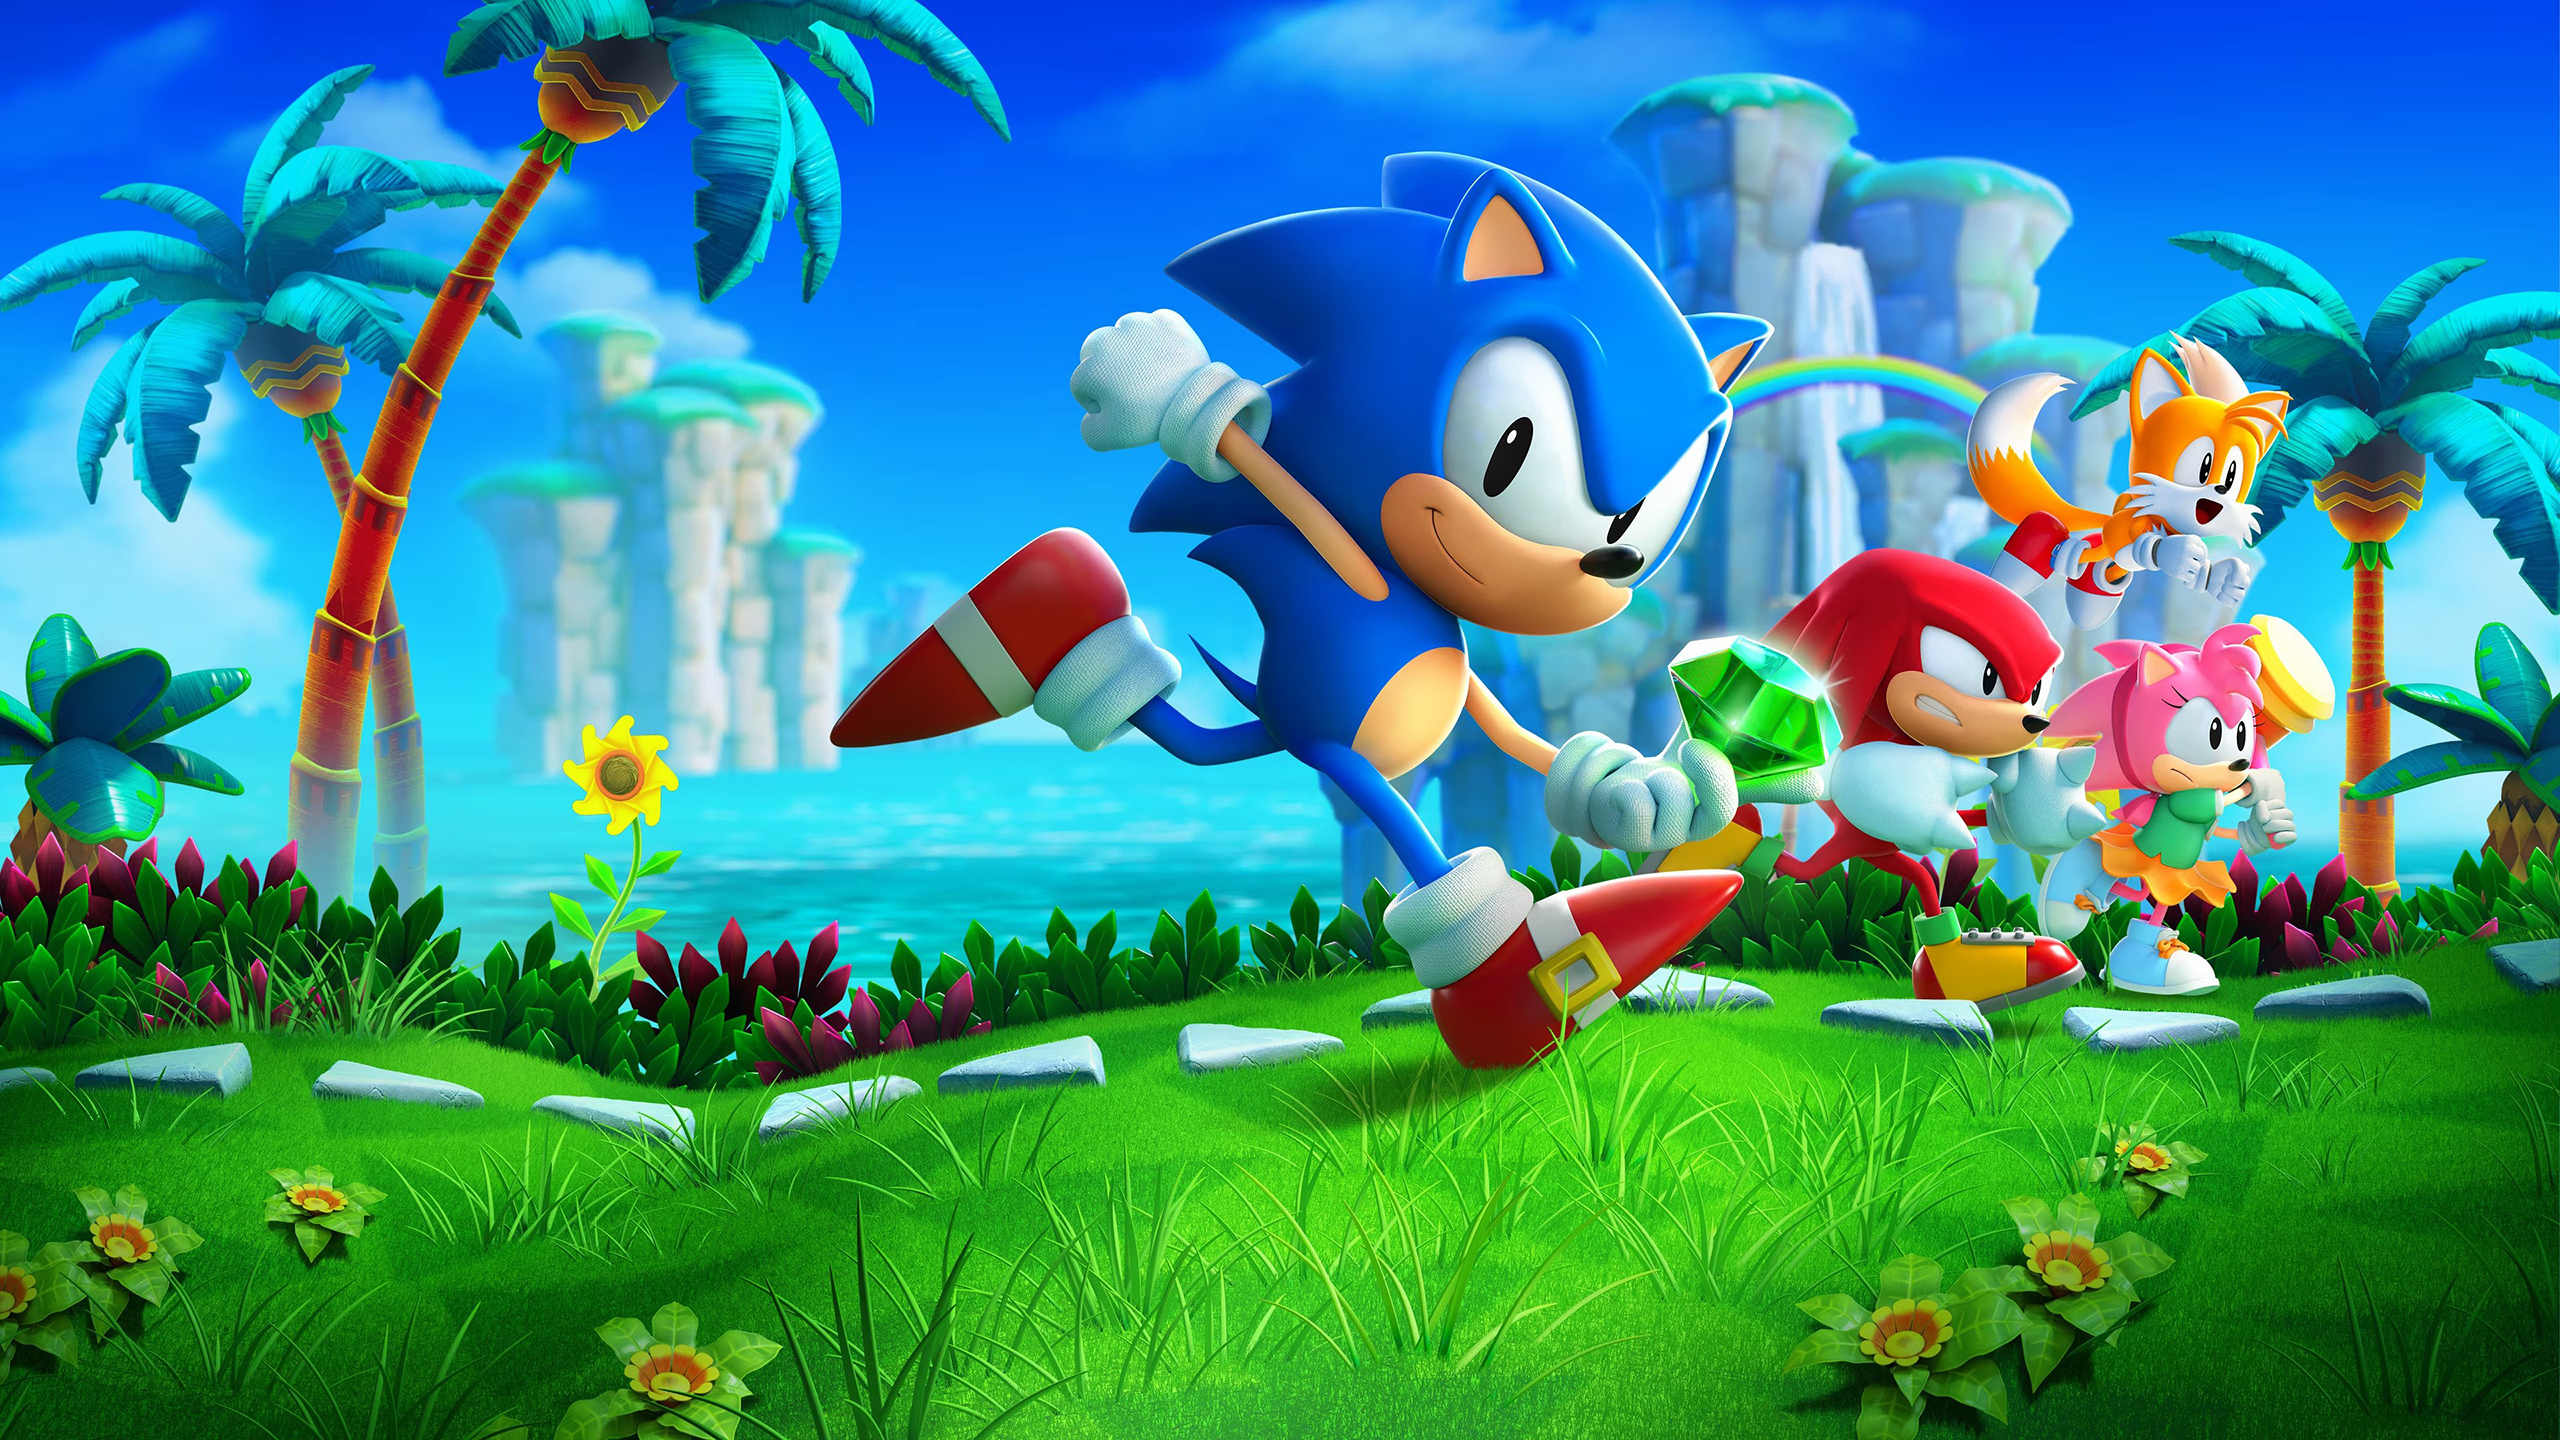 10+ Sonic The Hedgehog 2 HD Wallpapers and Backgrounds